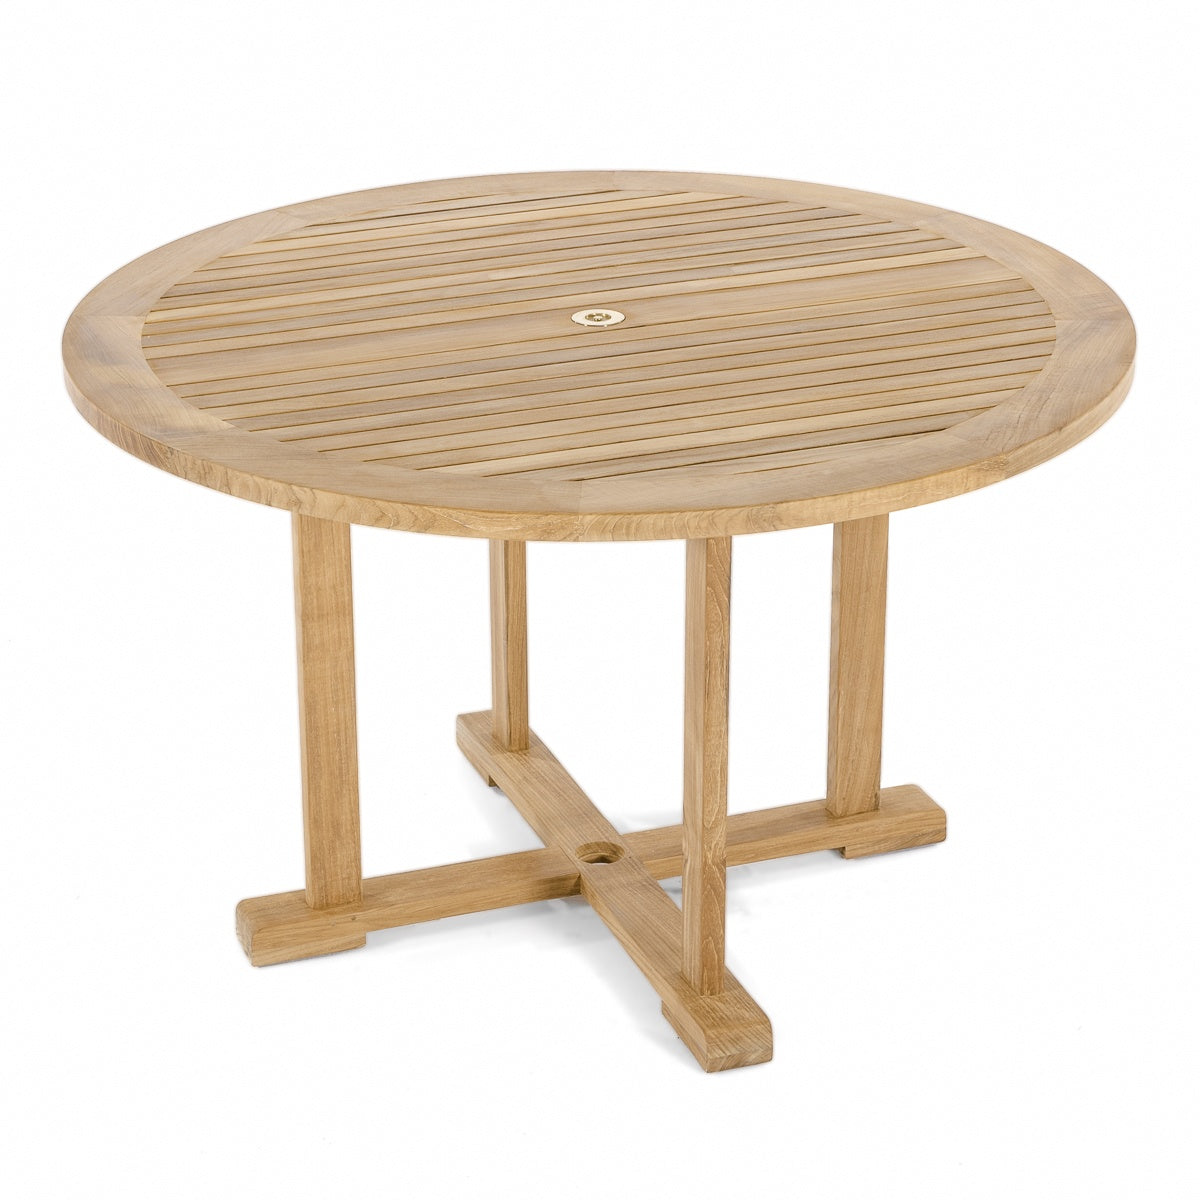 Westminster Teak - 4ft Round Teak Dining Table 48" Round Table - 15047